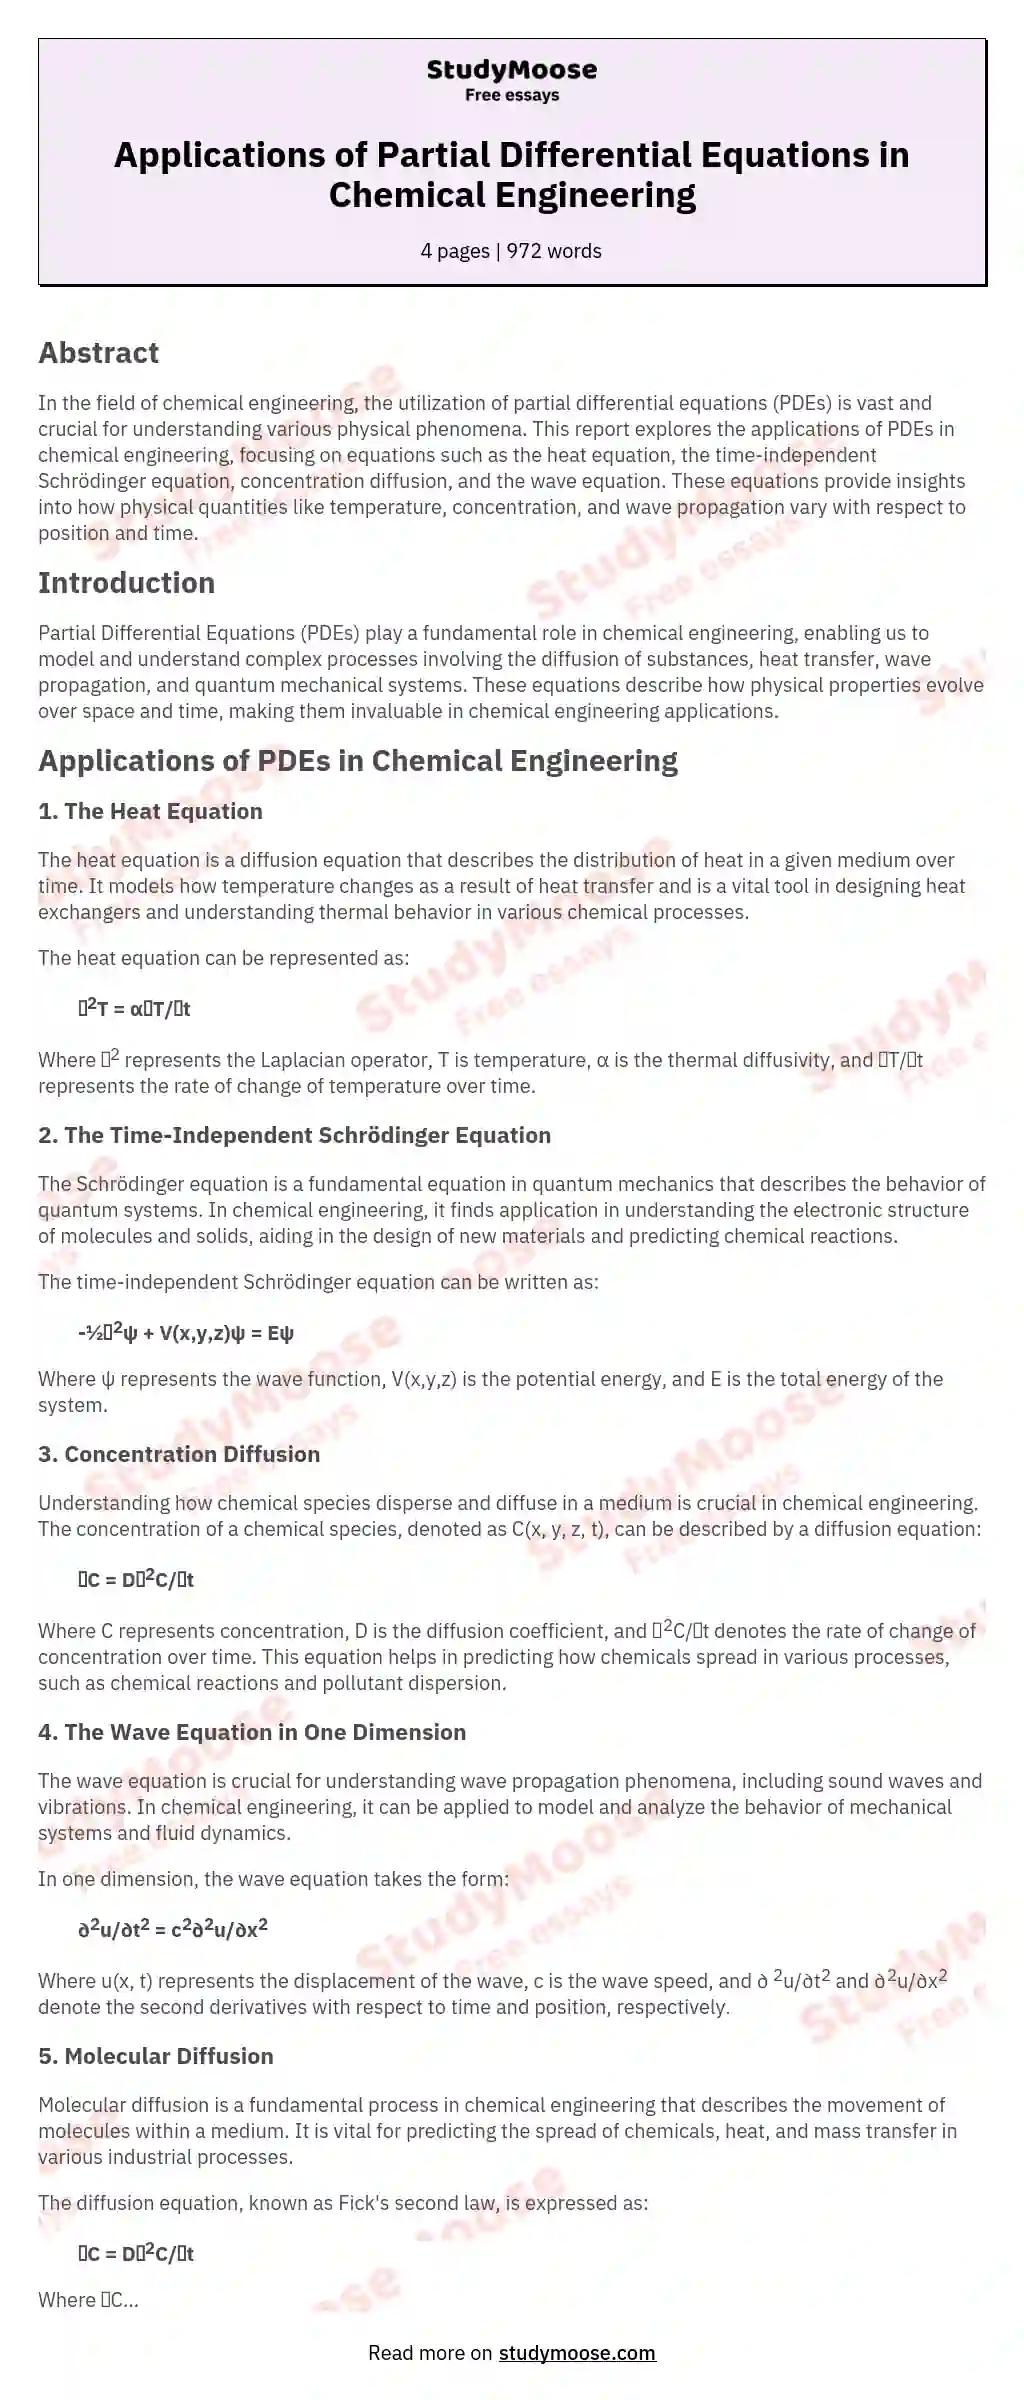 Applications of Partial Differential Equations in Chemical Engineering essay